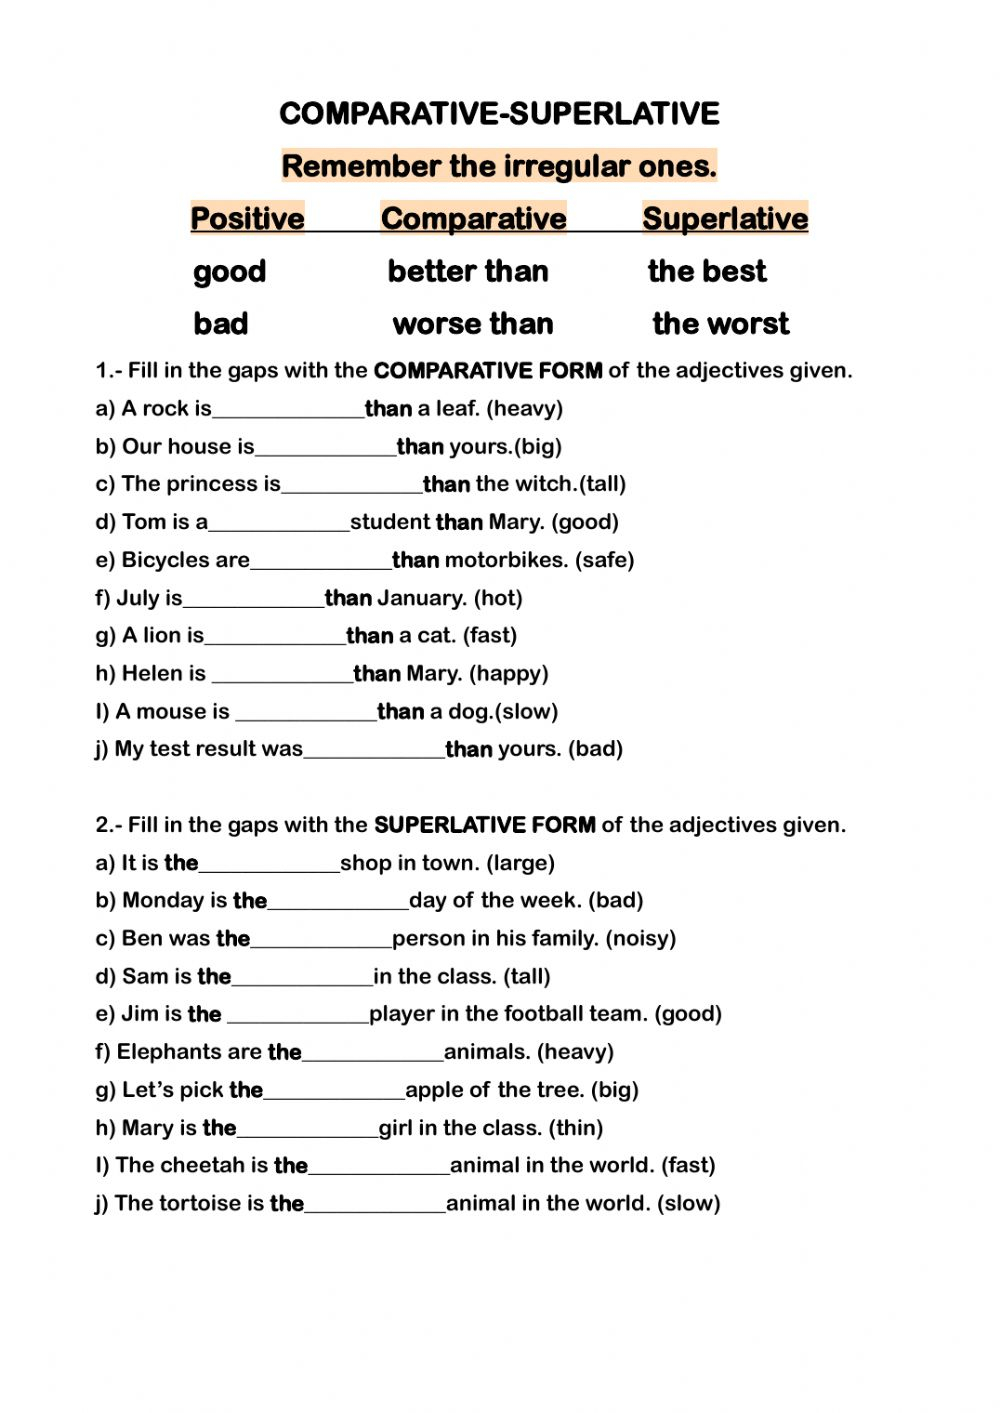 re-writing-comparative-and-superlative-adjectives-worksheet-part-1-superlative-adjectives